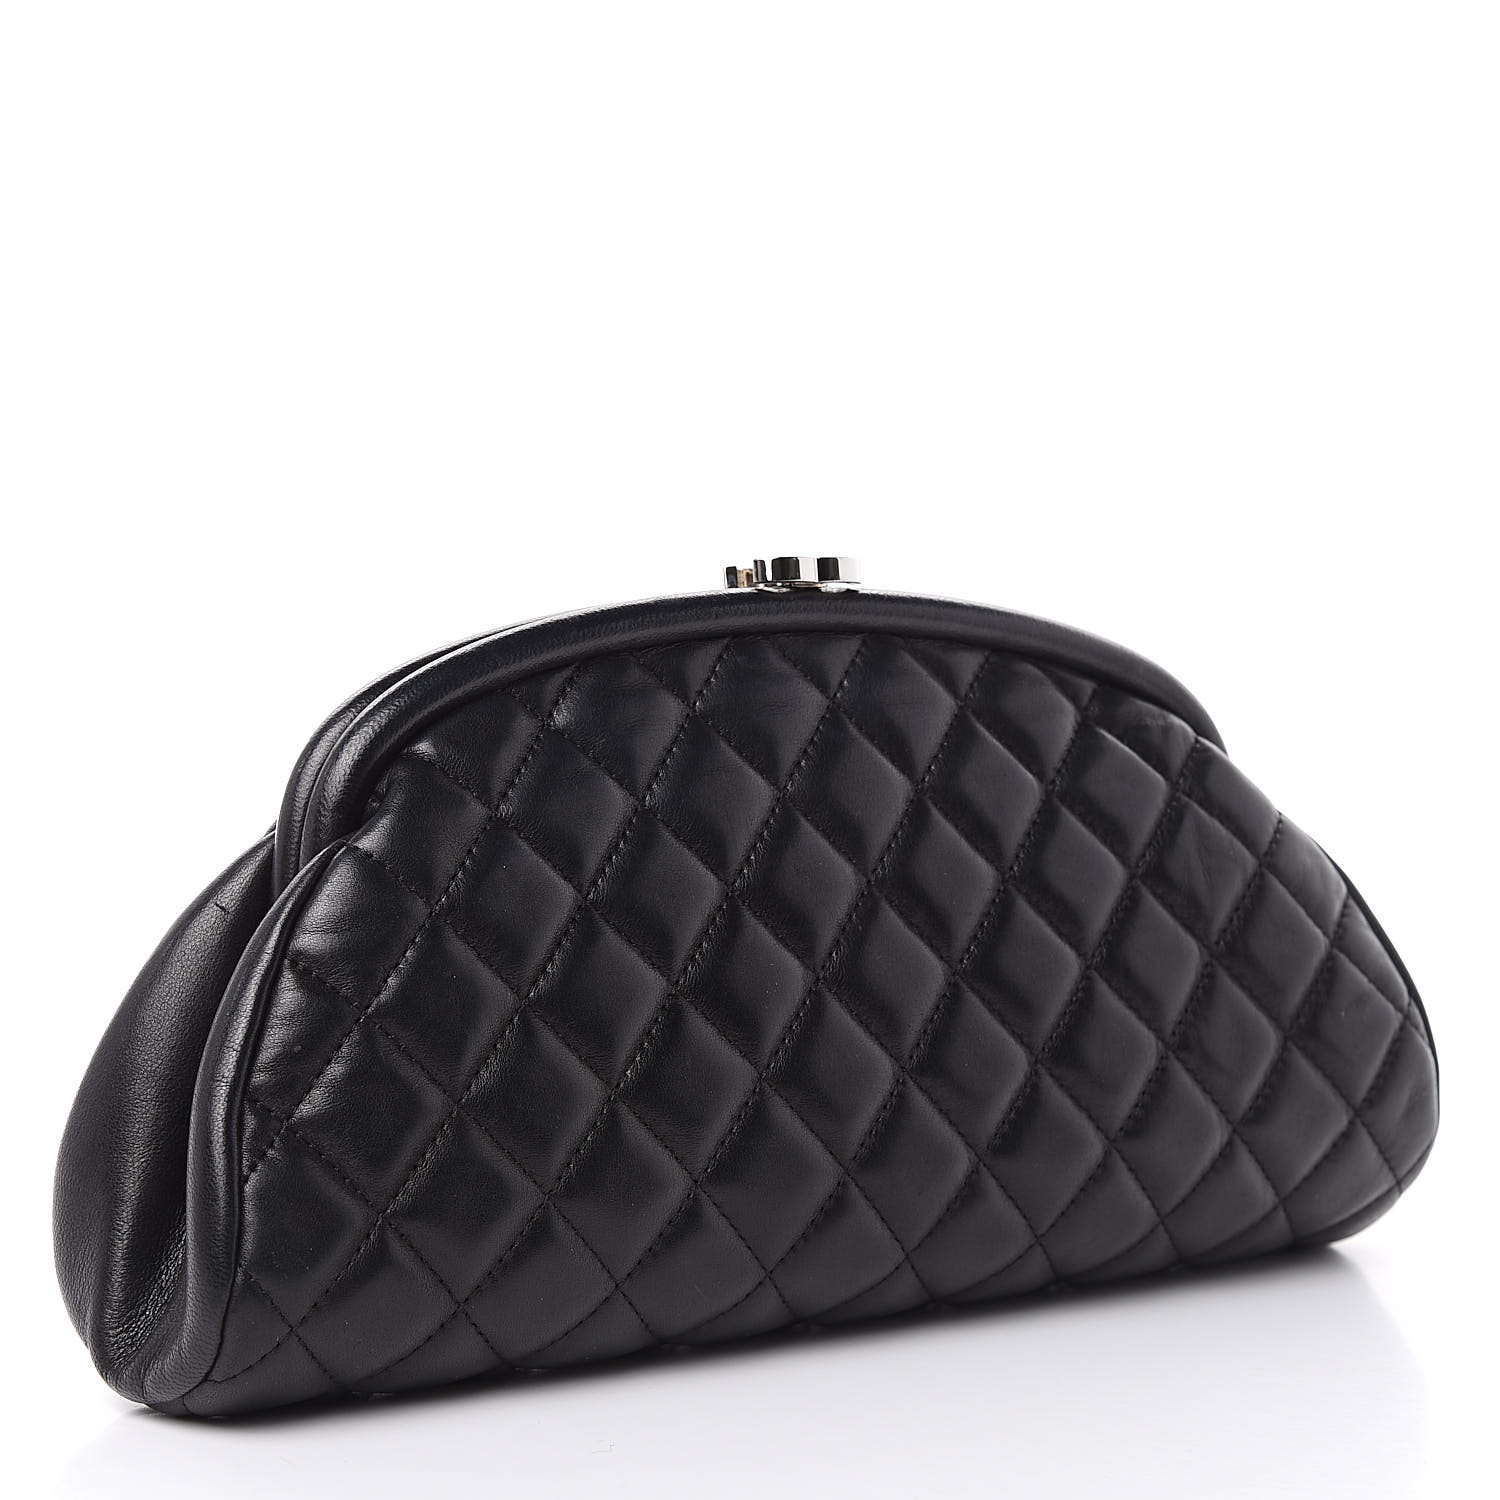 CHANEL Lambskin Quilted Timeless Clutch Black 500836